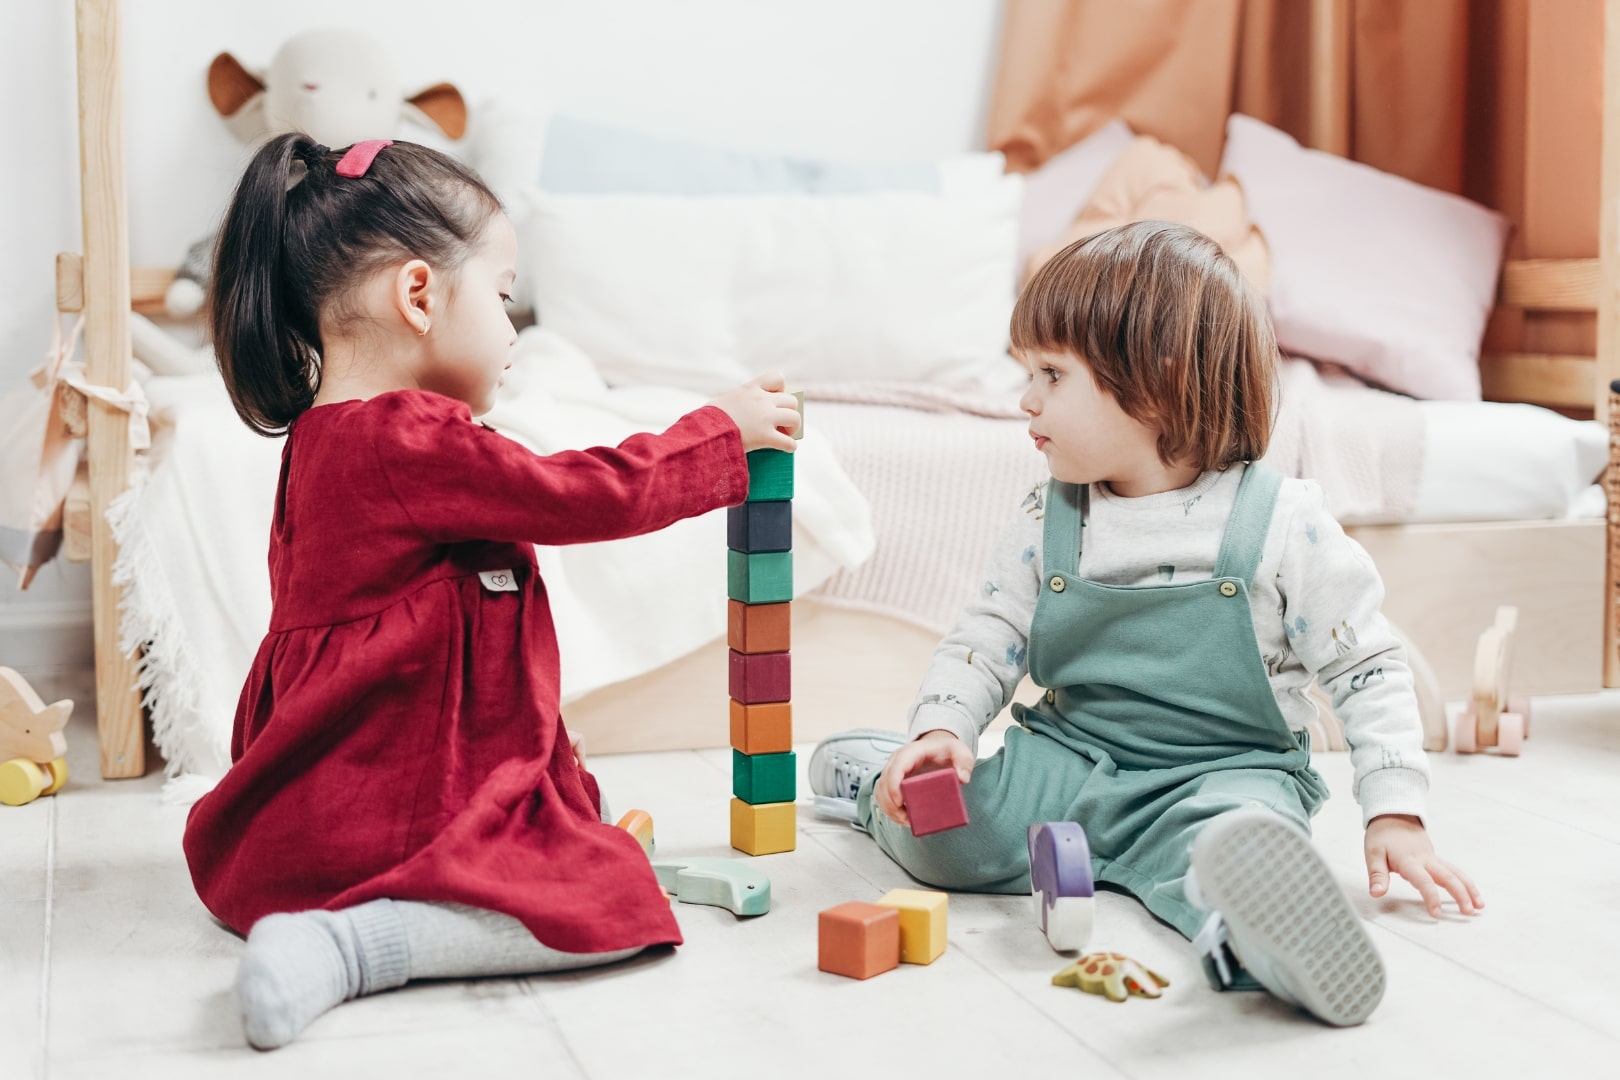 Two children playing with wooden blocks in a room.